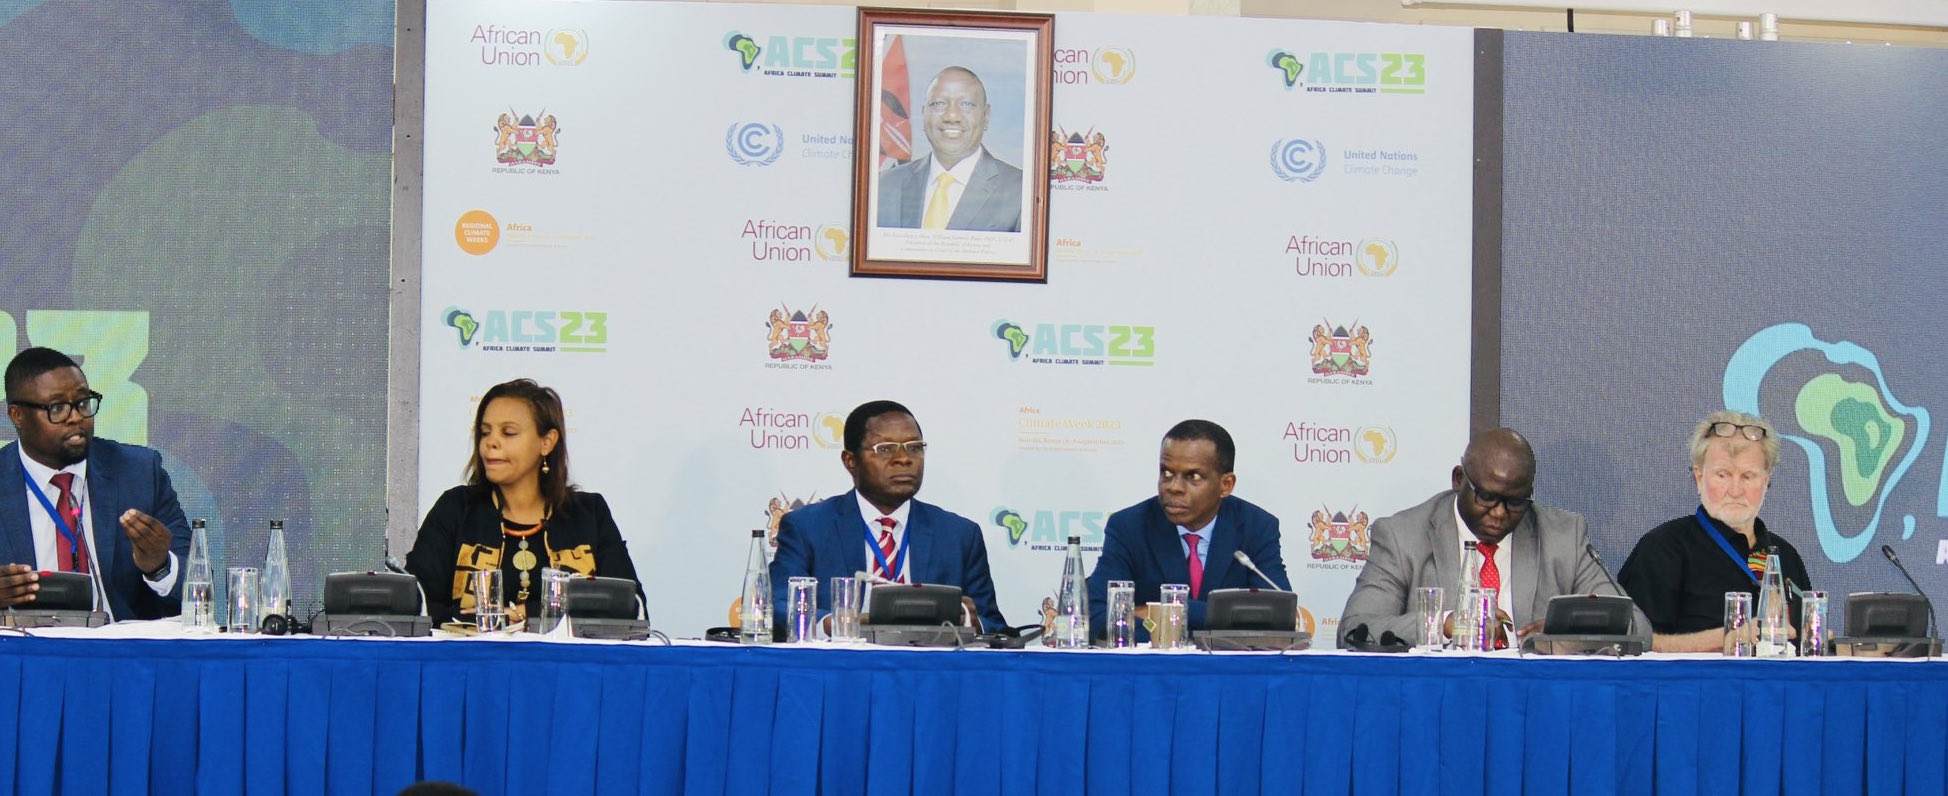 Africa Climate Summit: “Africa’s Green Minerals Strategy” a catalyst for industrialisation